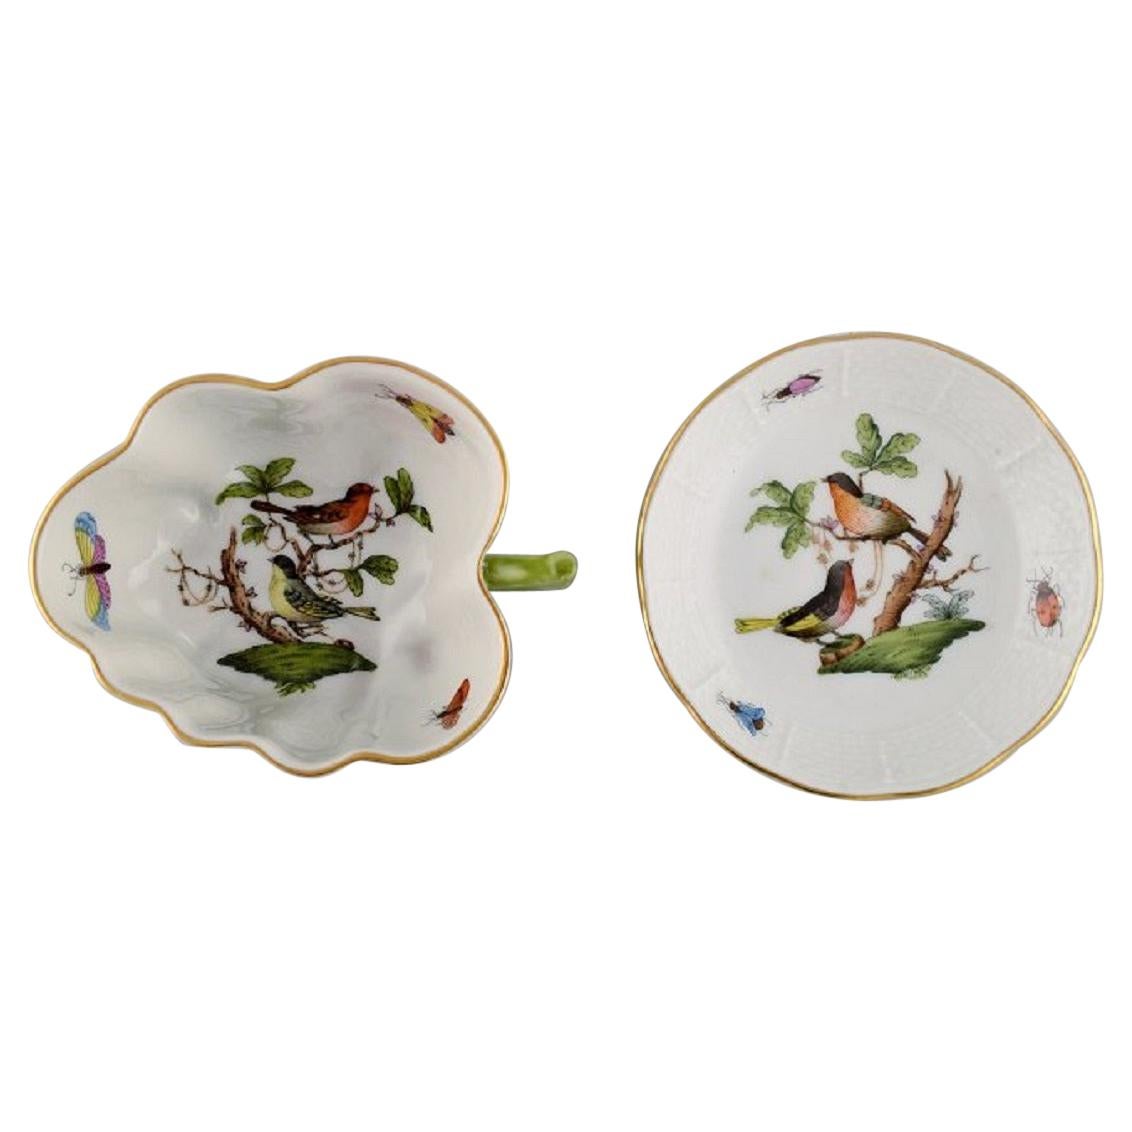 Herend Rothschild Bird, Porcelain Butter Pad and Small Bowl with Handle